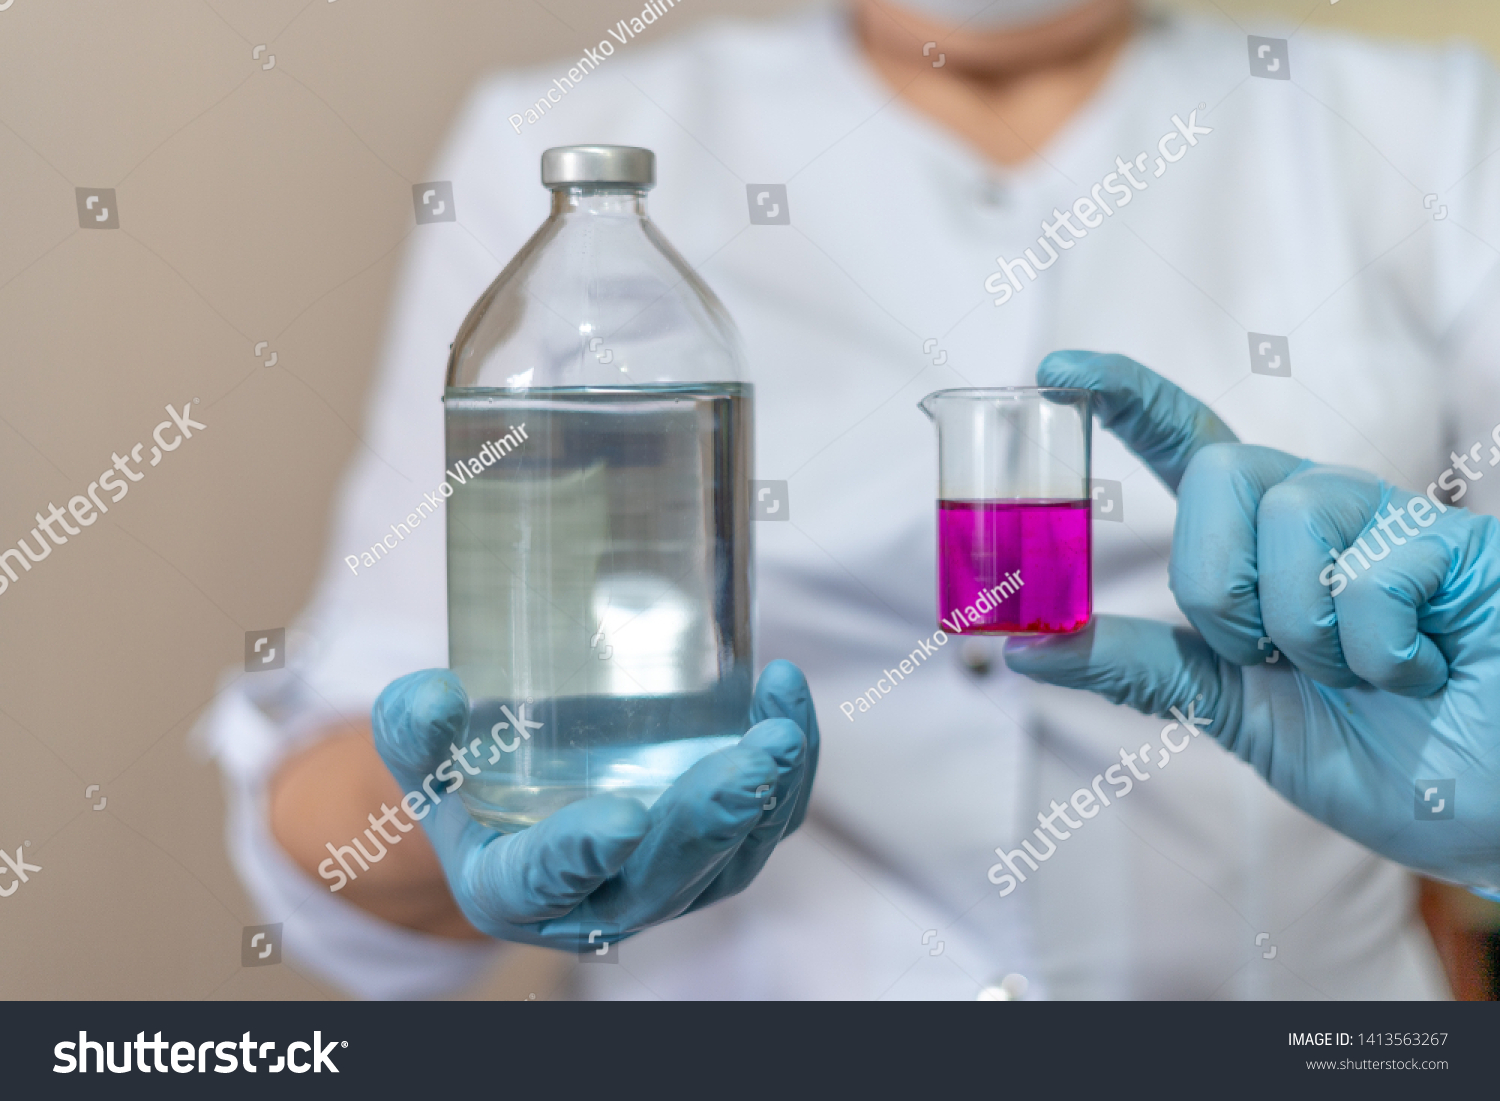 Doctor or scientist conducts experiments and presents vial liquid laboratory sample and contrasty potassium permanganate medical bottle. Pharmacy, science, research lab and healthcare concept. #1413563267